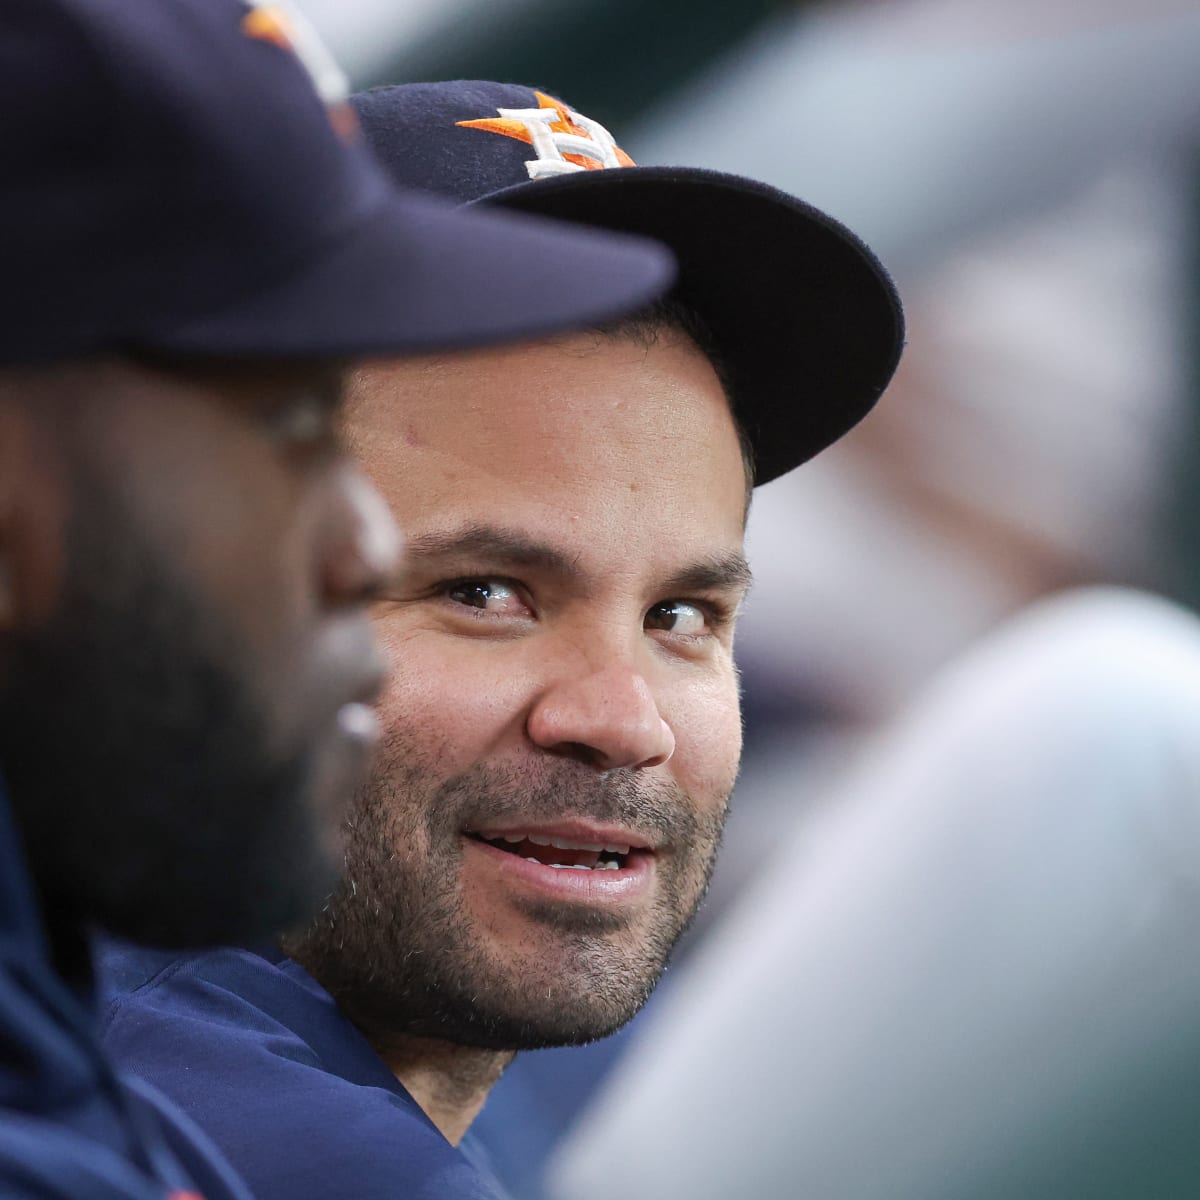 Astros' Jose Altuve misses fourth straight game; return is imminent